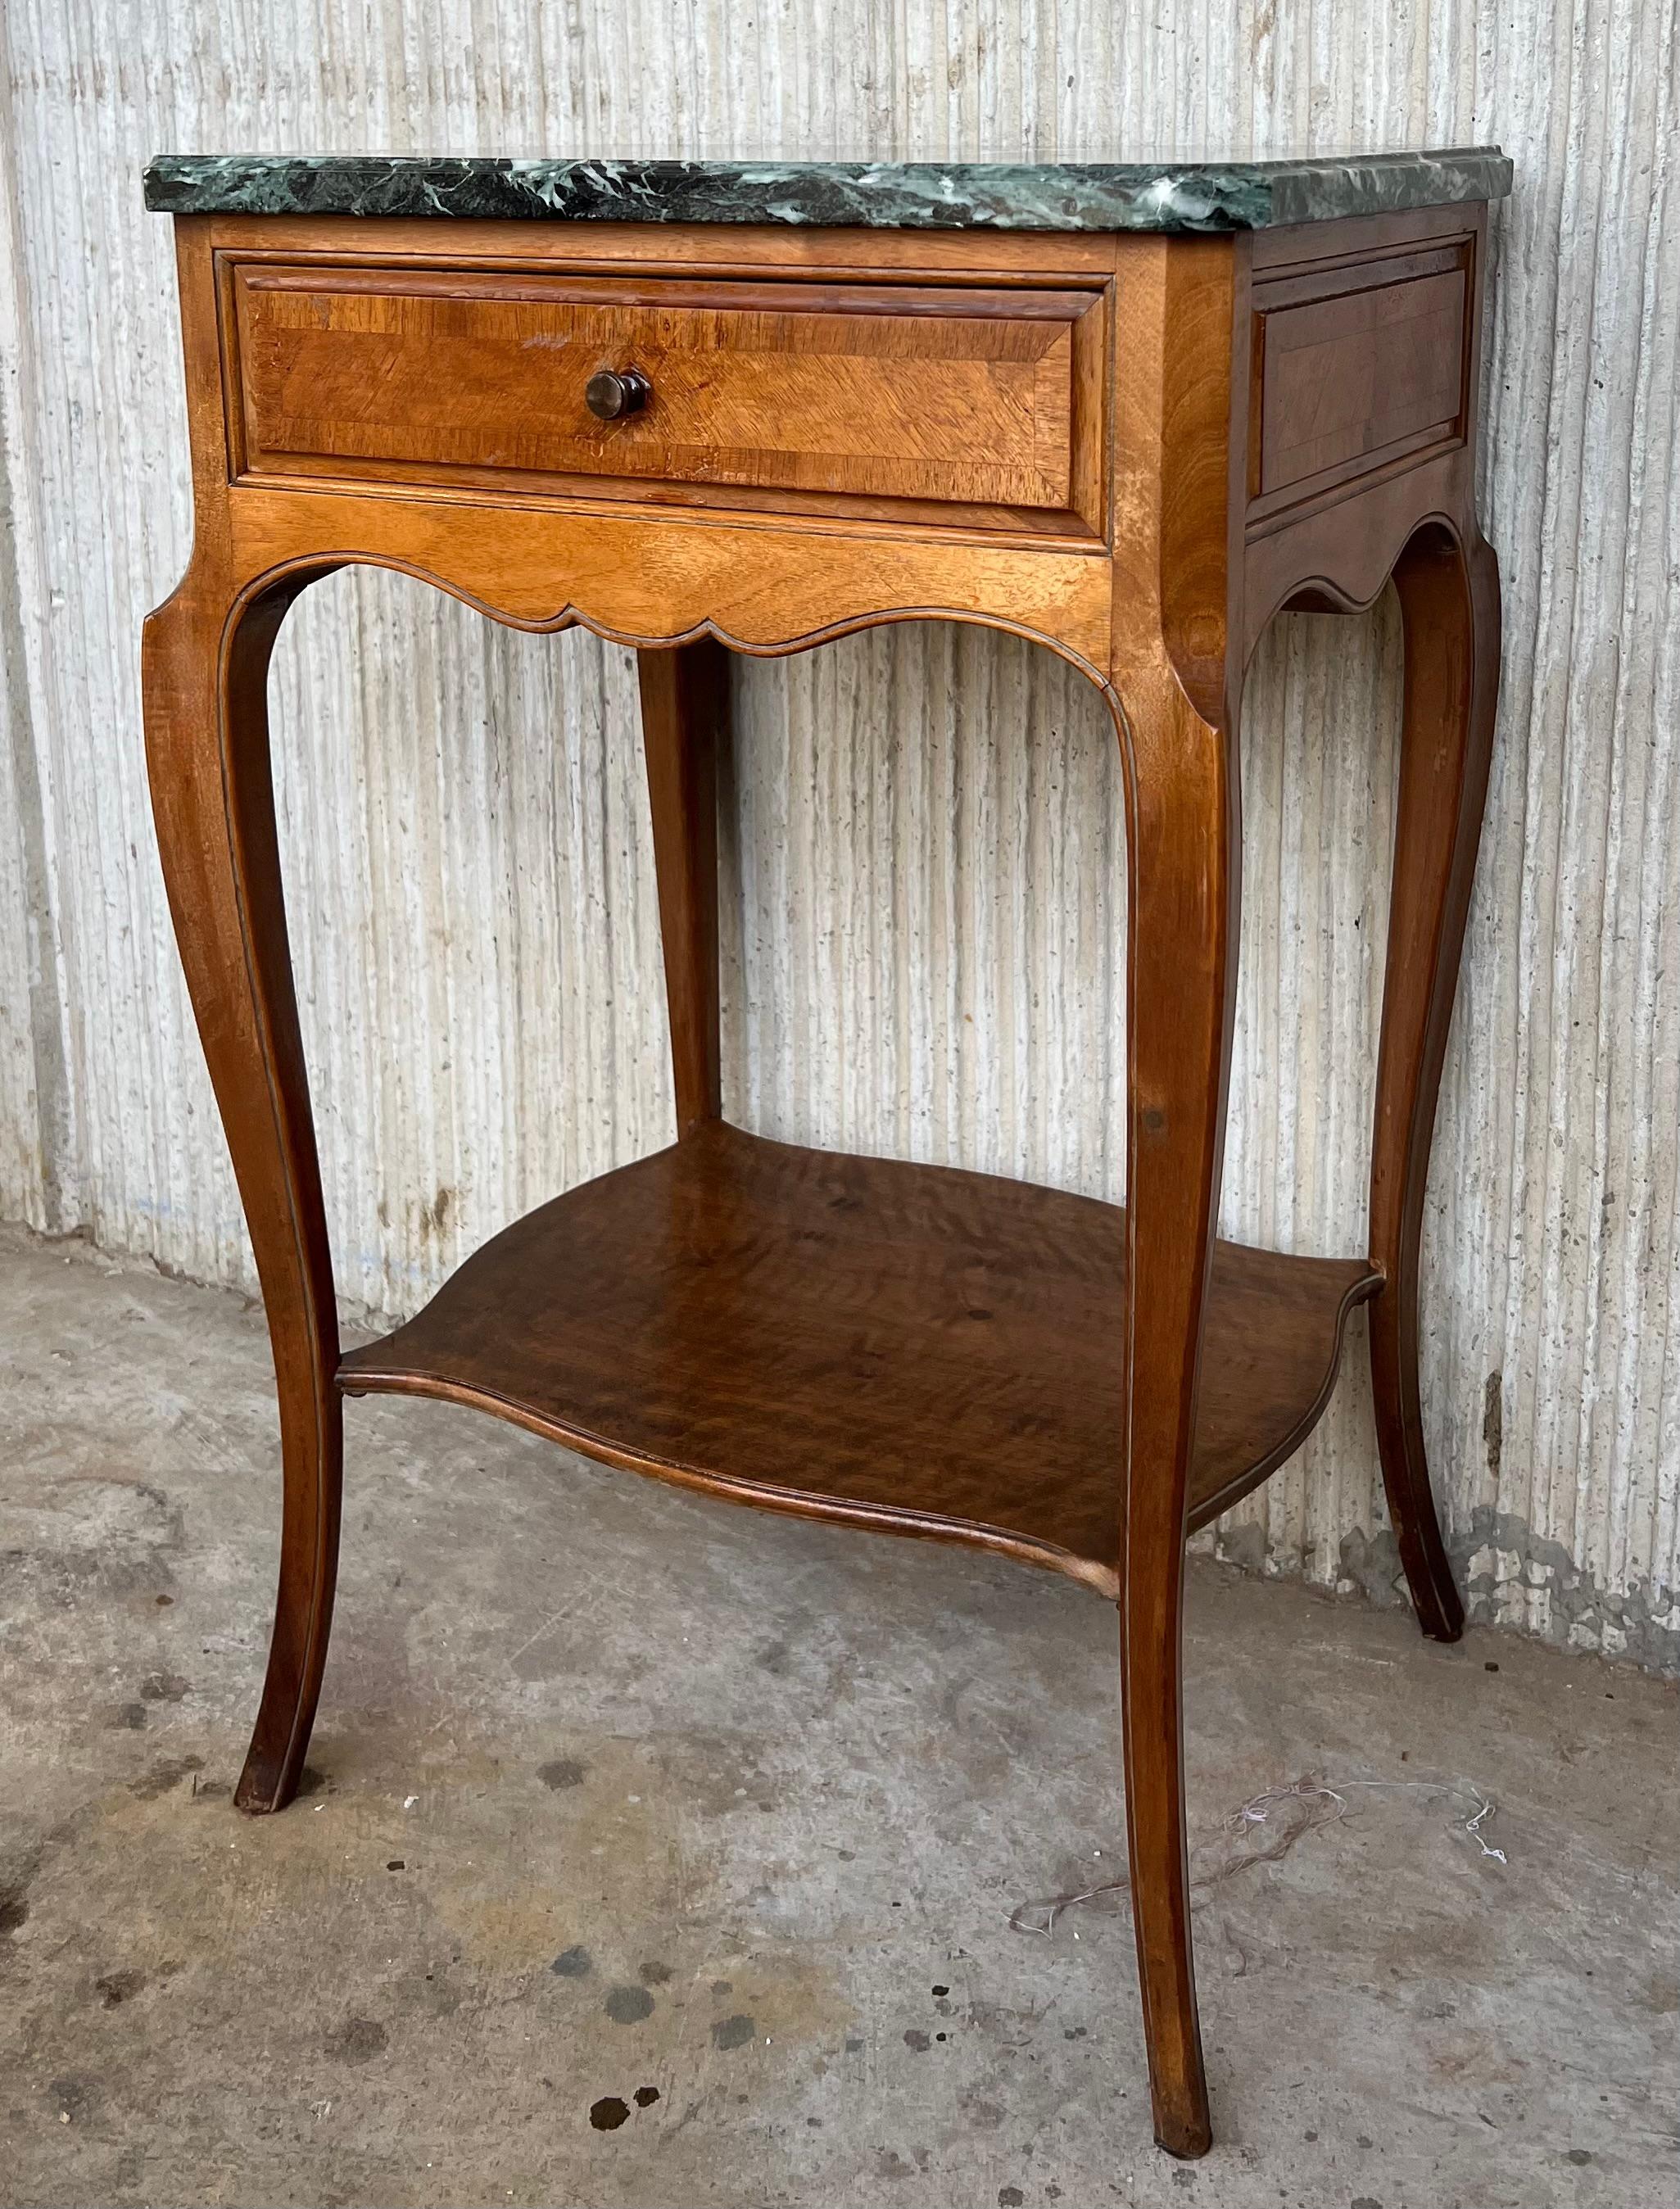 20th century pair of French nightstands with one-drawer and bronze hardware
Recently restored.